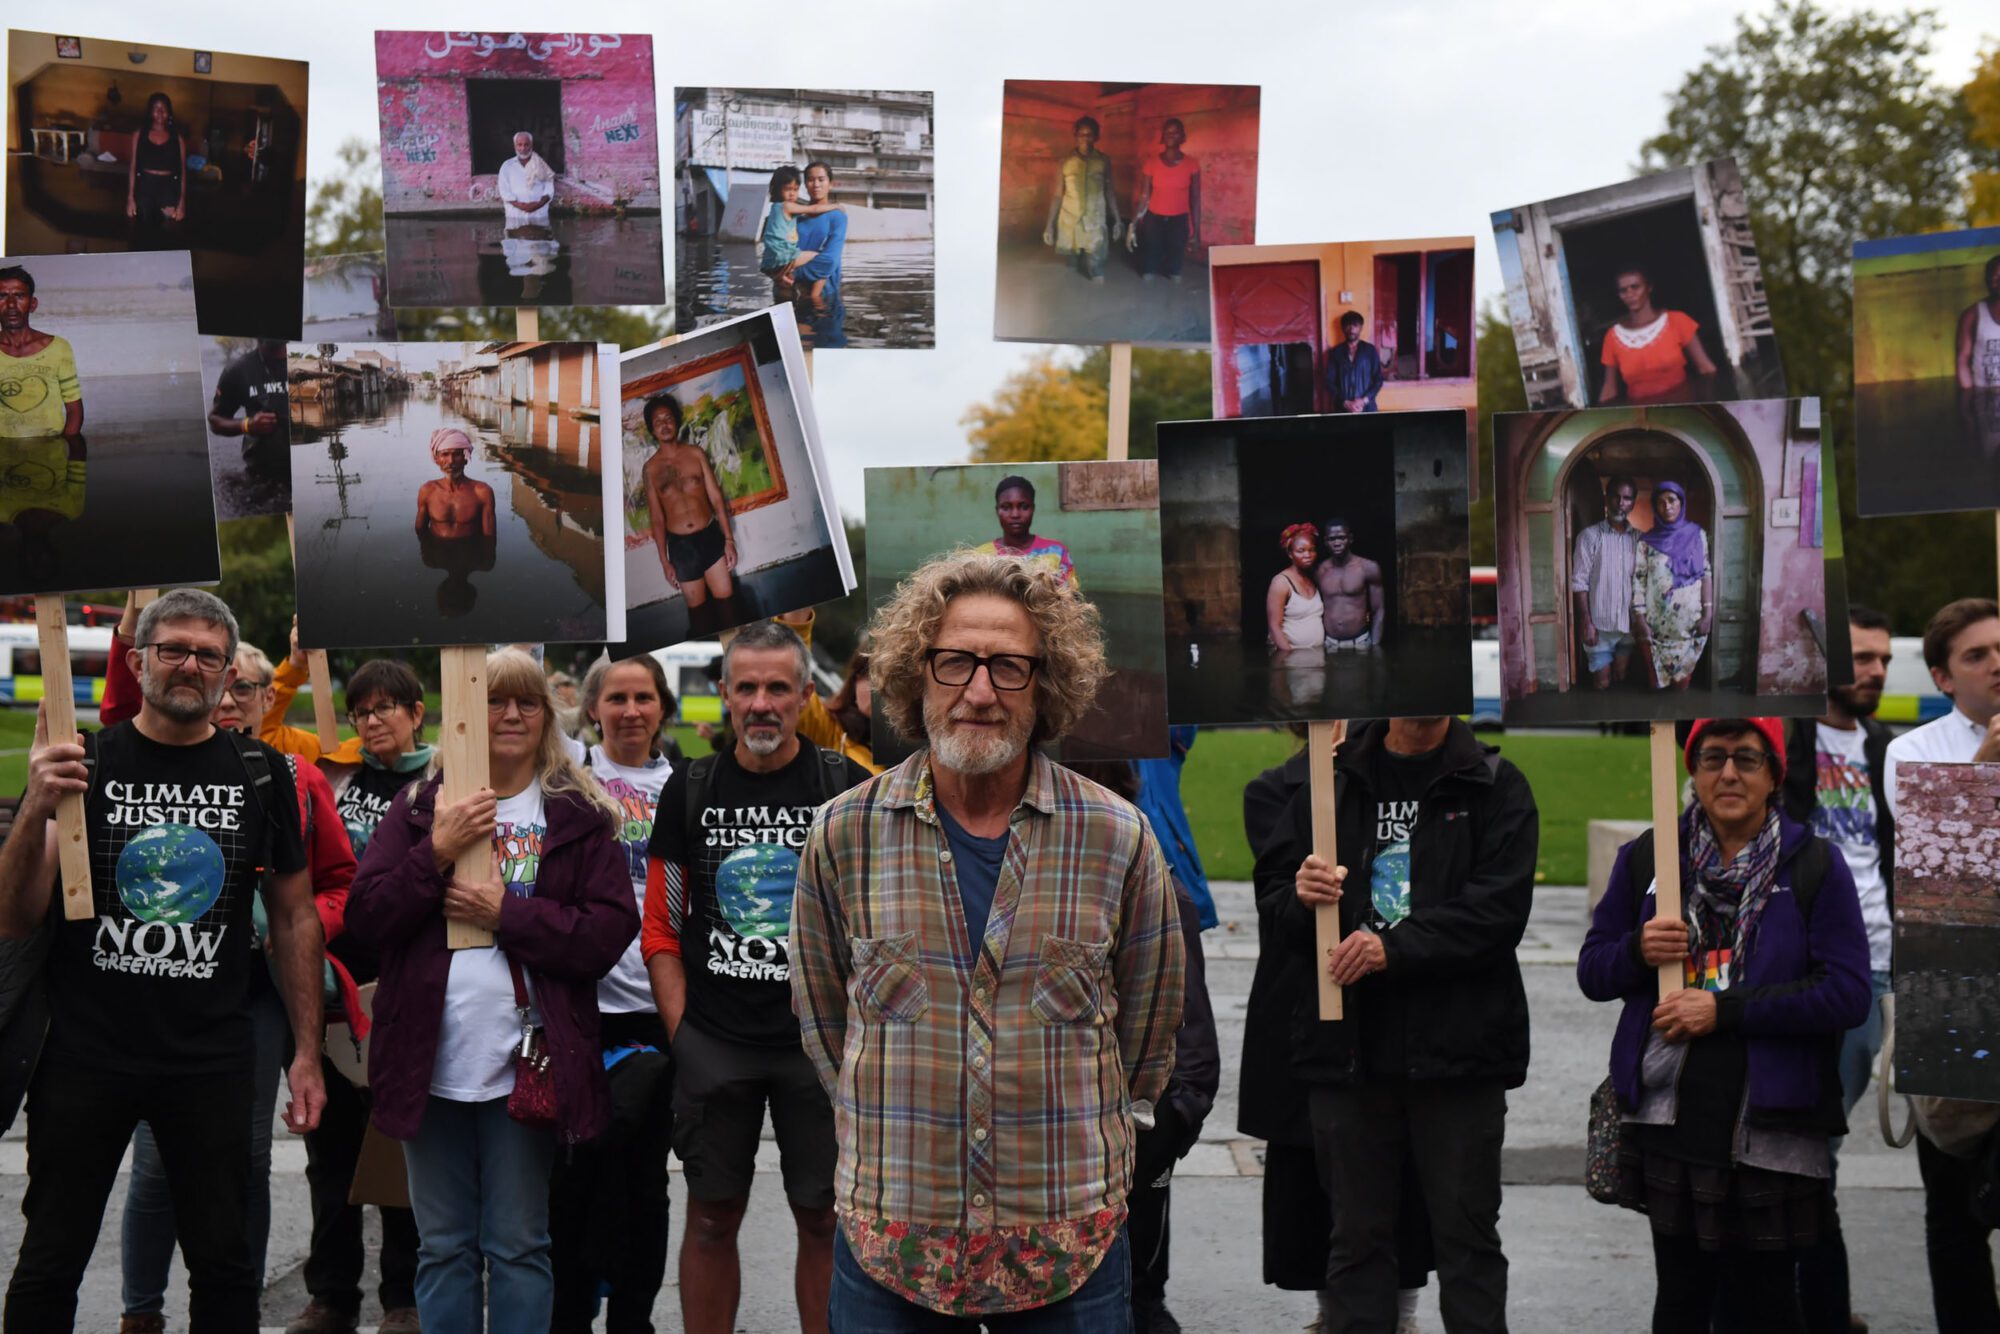 A crowd of people stand holding photographs high in the air, many wearing the same black "climate justice NOW!" T shirt, standing behind a smiling man with a beard and longish curly light brown hair.